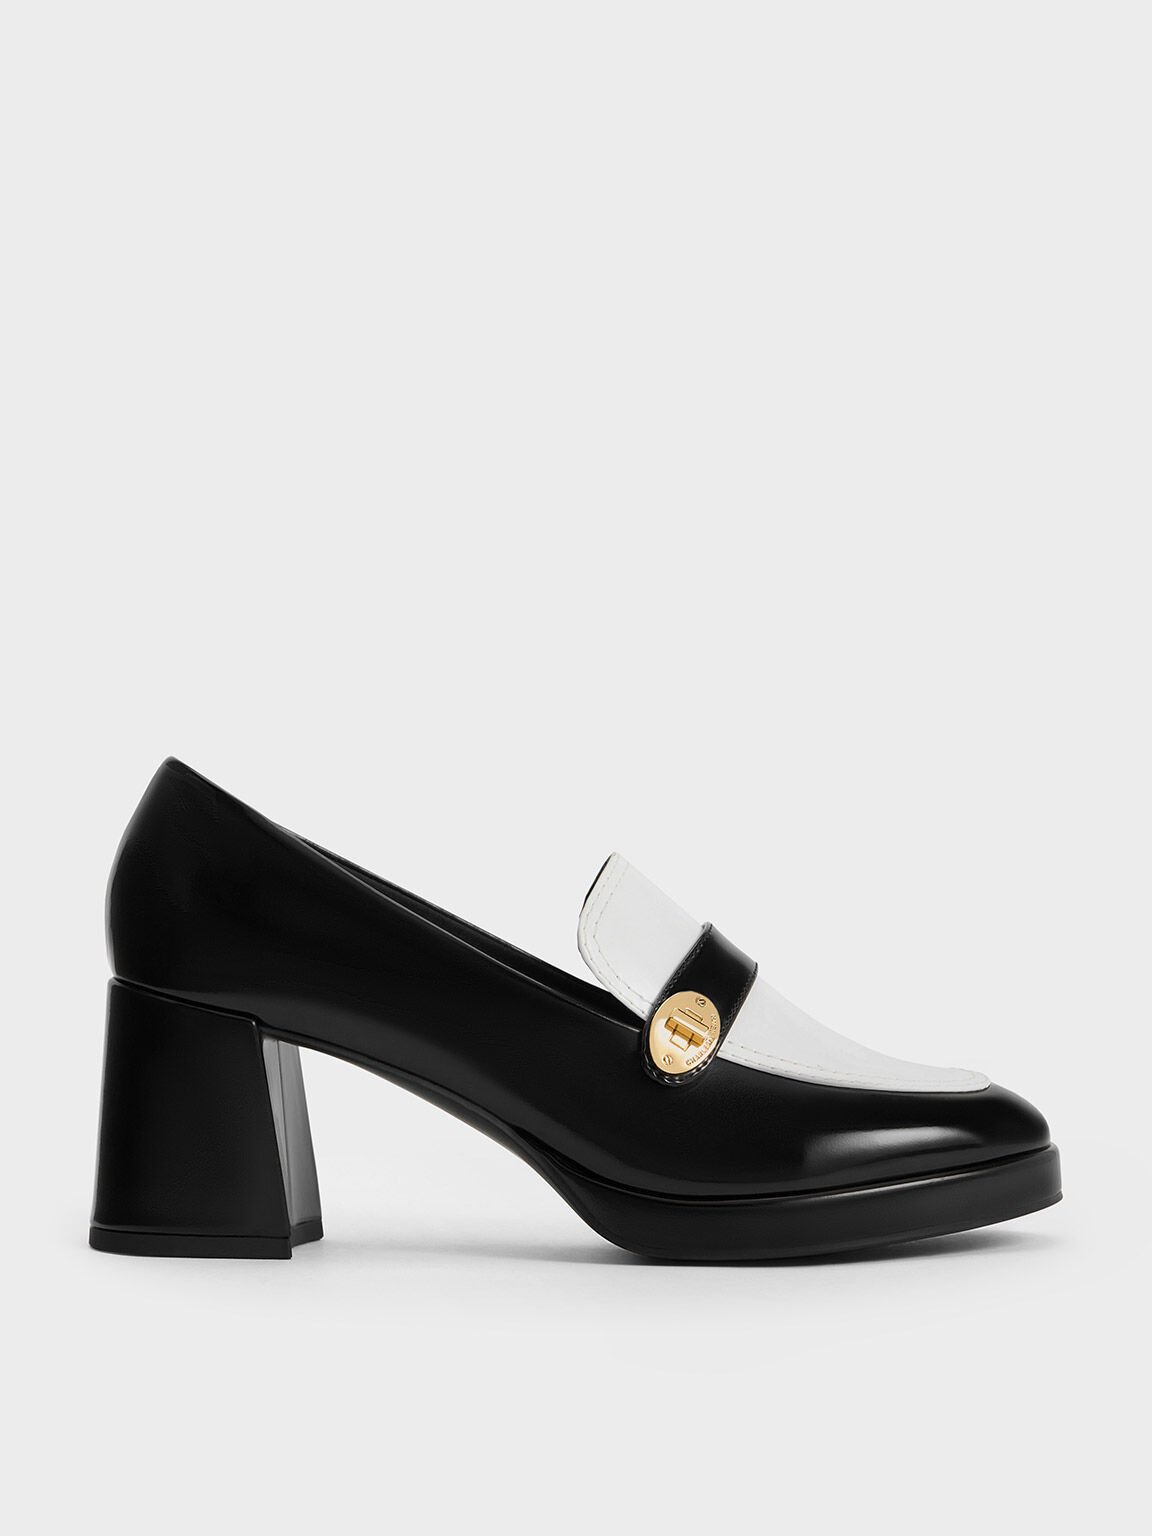 Multicoloured Two-Tone Metallic Accent Loafer Pumps - CHARLES & KEITH US